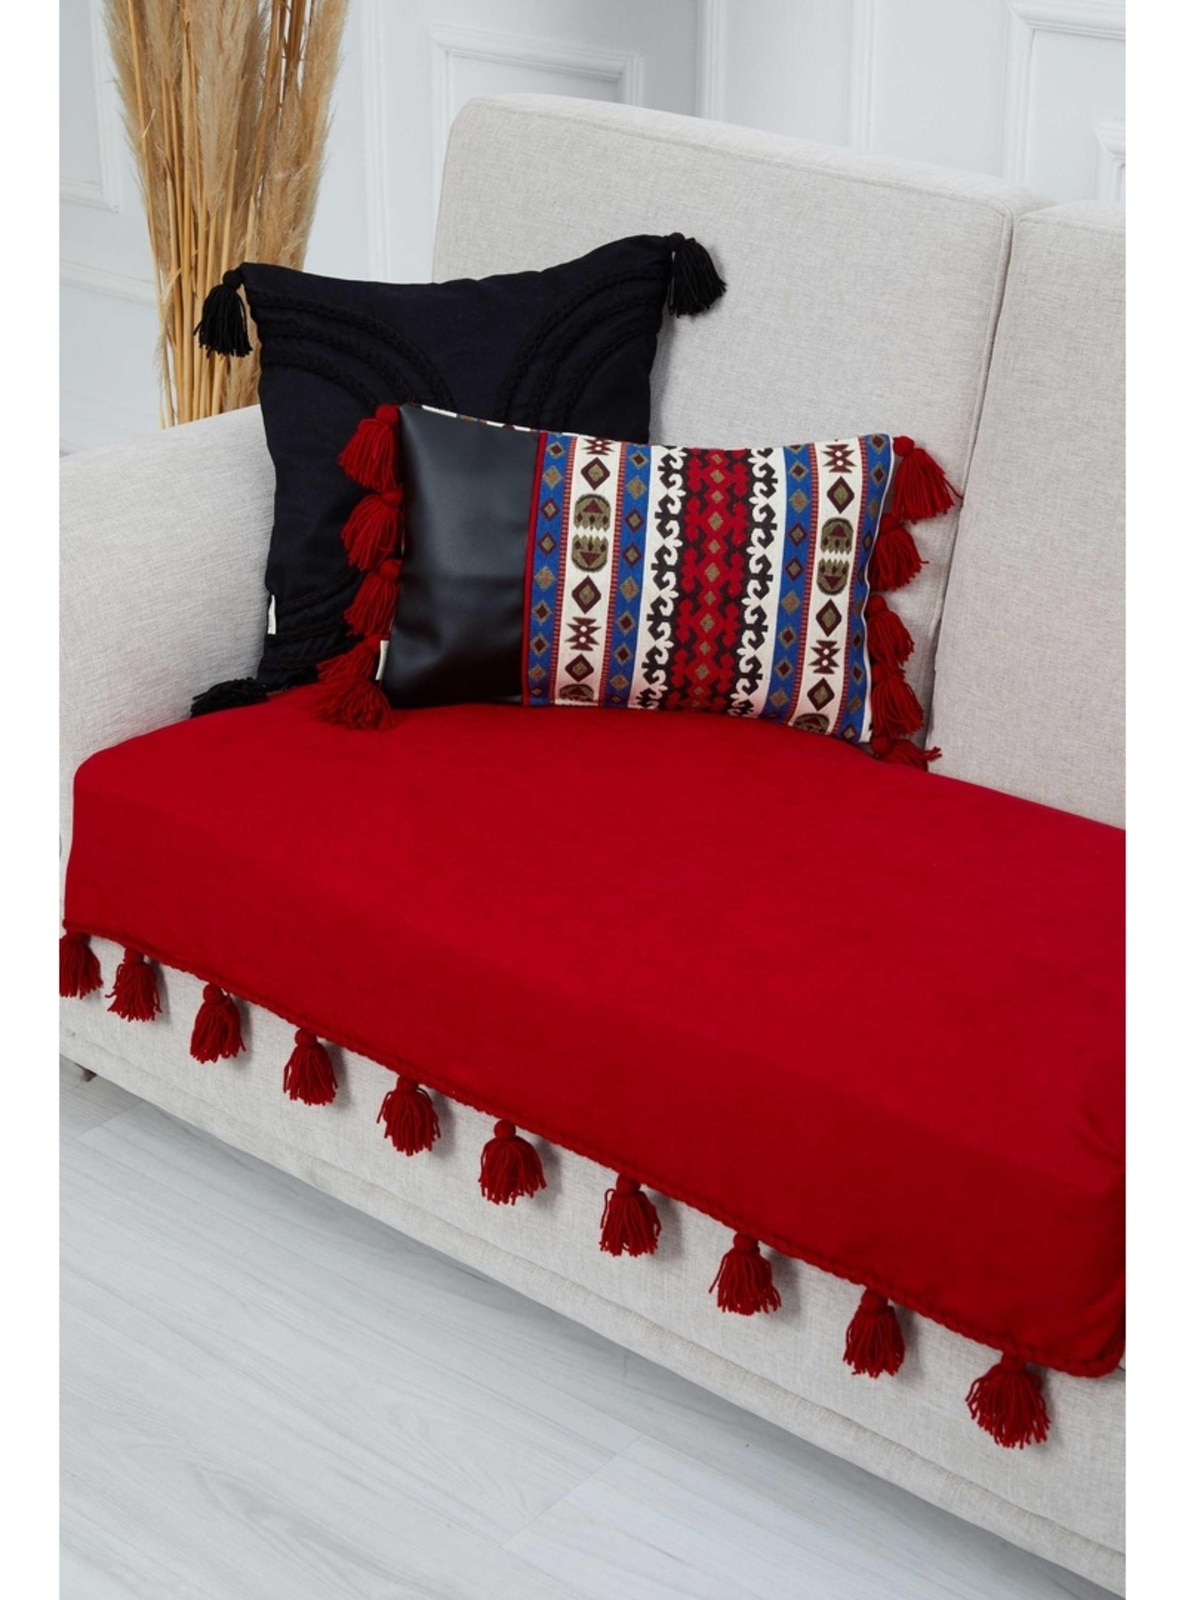 Red Sofa Throws